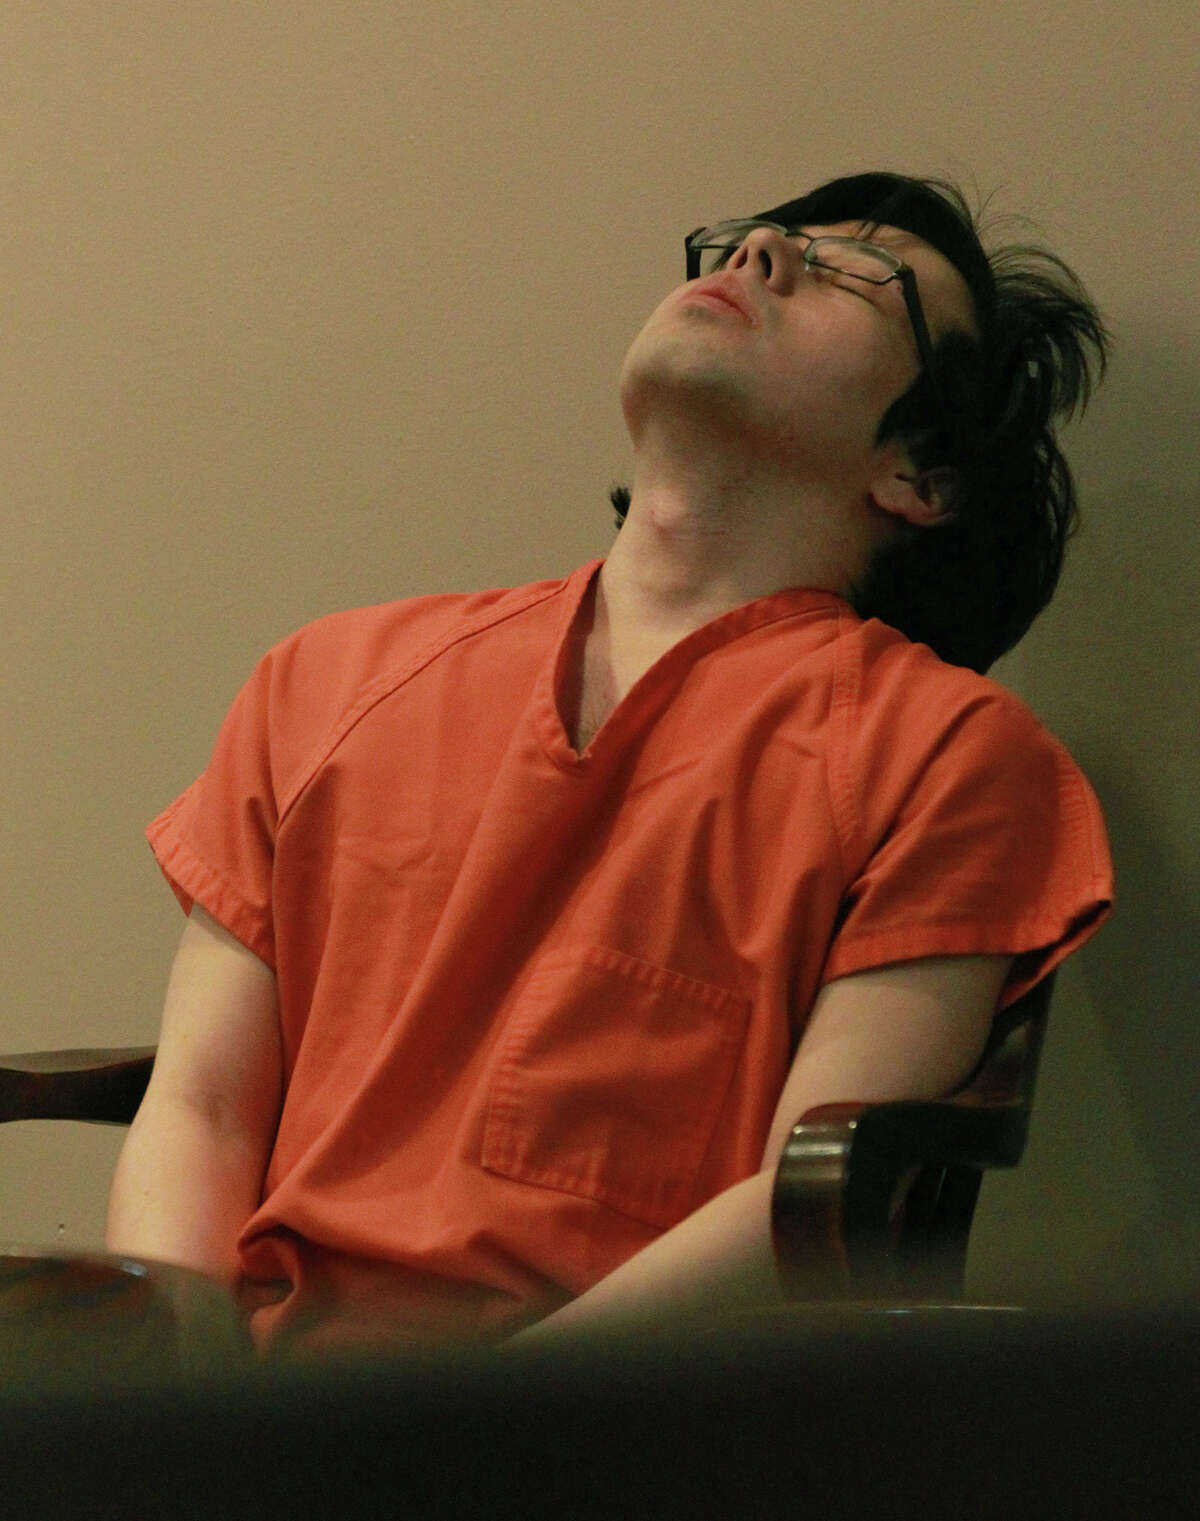 Defendant Yu Masaki leans back in the 144th District Court prior to sentencing Thursday July 18, 2013. Masaki pleaded guilty in March to shooting and killing Juan Carlos "J.C." Escamilla and also shooting and wounding Margaret "Maggie McCombs. Masaki received a life sentence for the crimes.